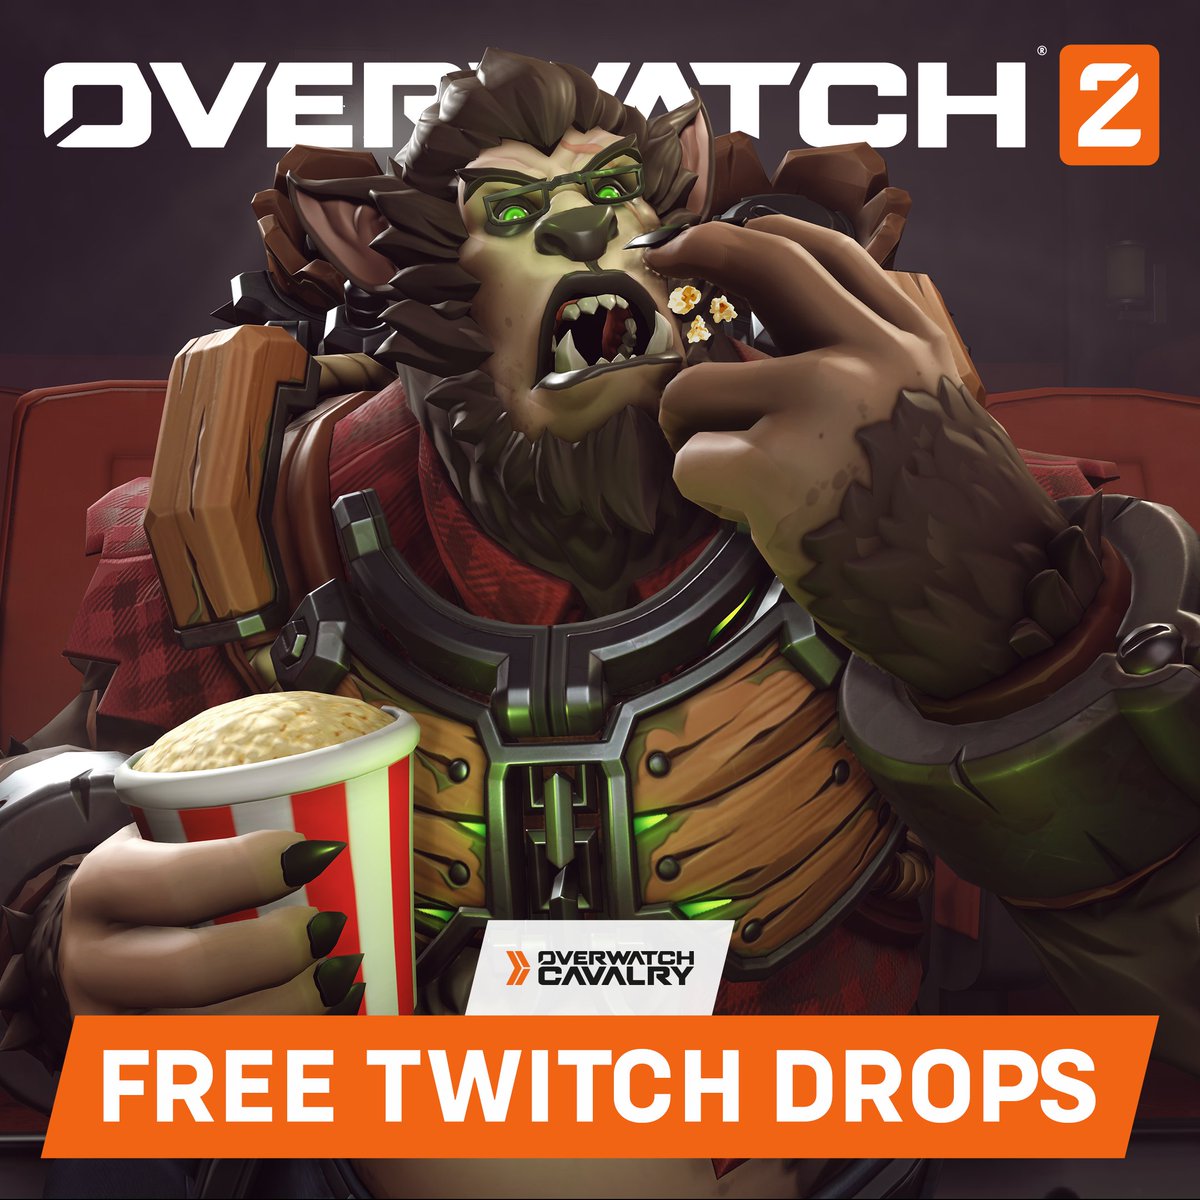 Starting tomorrow, you will be able to earn new Twitch Drops 🔴 Collect the Werewolf Spray for 2 Hours of watch time and 6 Hours for the Werewolf Winston legendary skin 🐺🪓